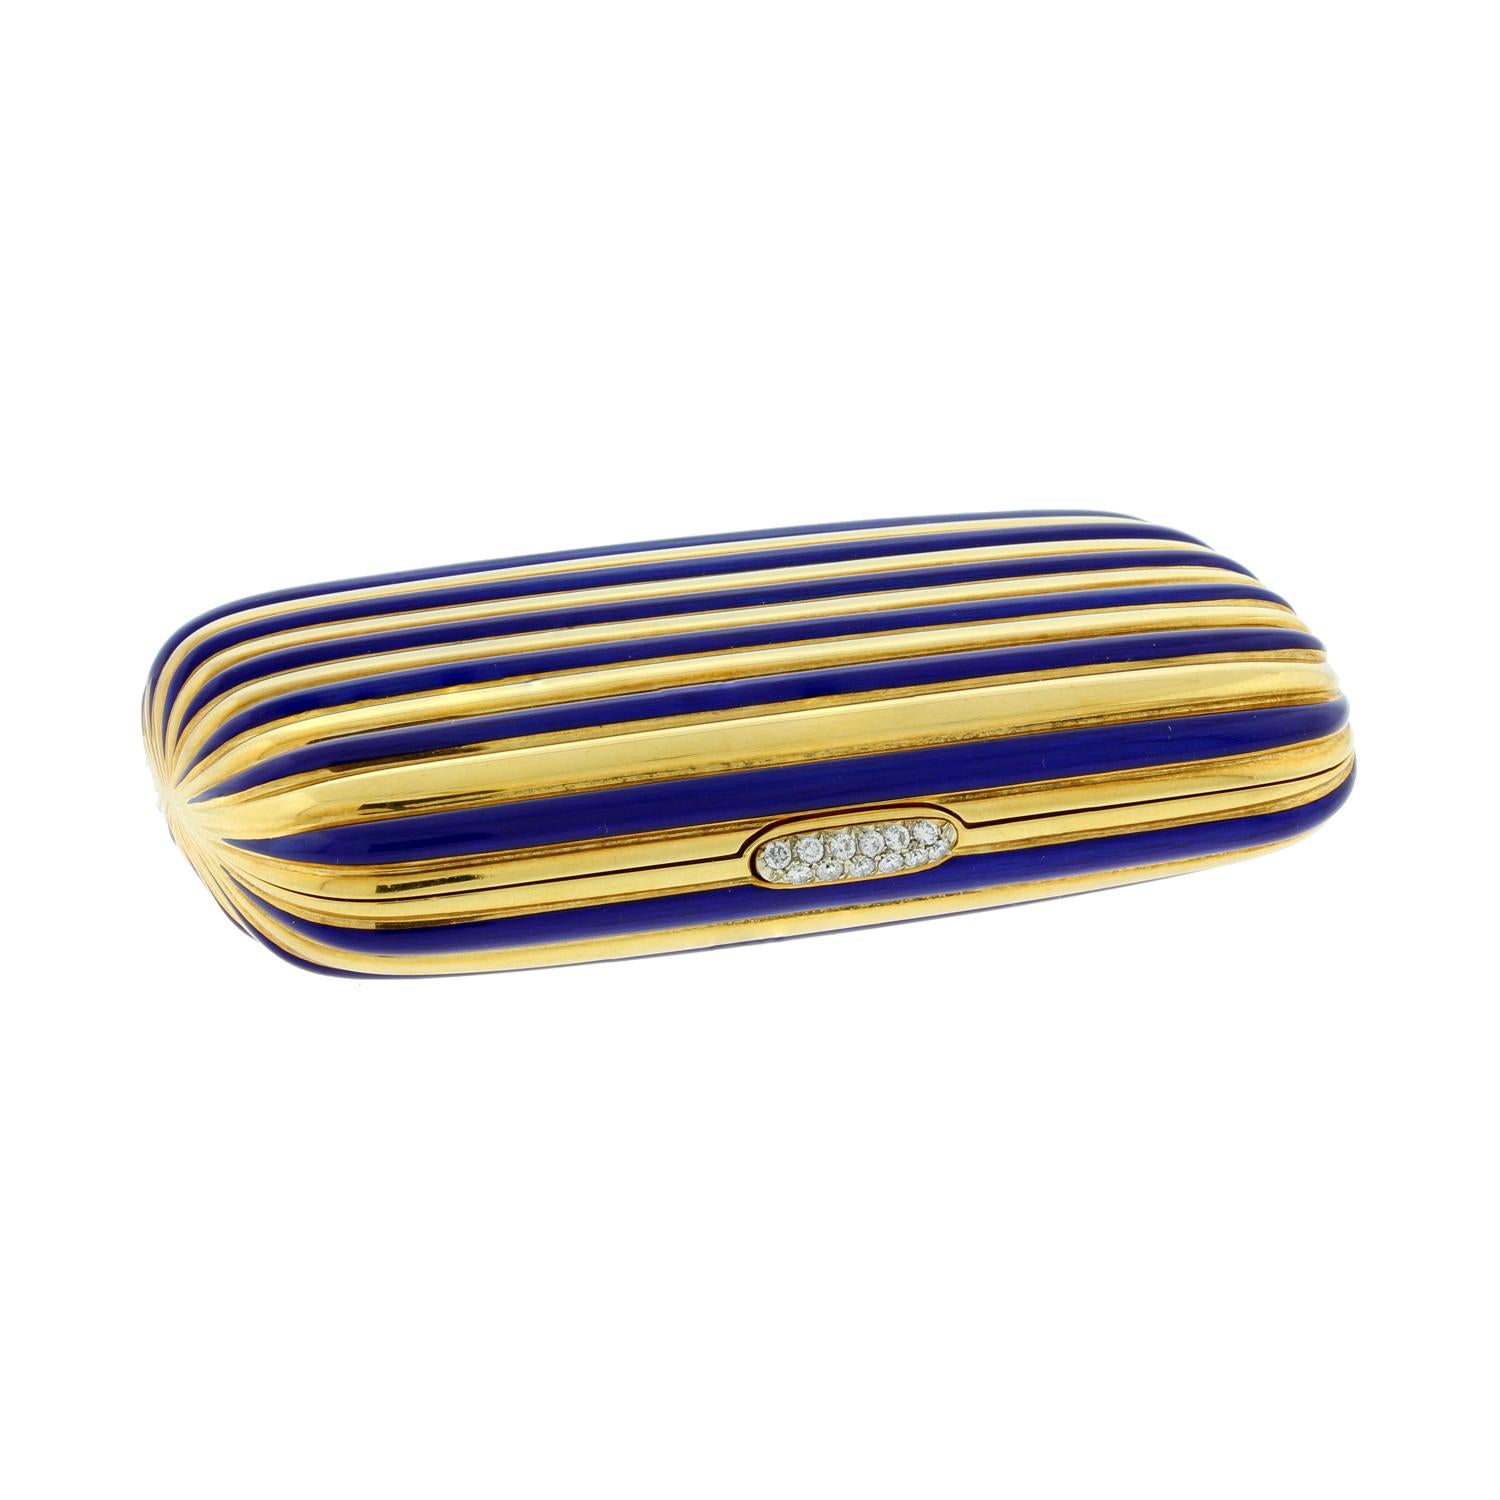 A lovely mirrored powder compact featuring a striped design in 18K yellow gold and vibrant blue enamel. The compact opens with a press on the diamond clasp.  Opening the case reveals a mirror and open powder compartment.

Case Length: 3 inches
Case